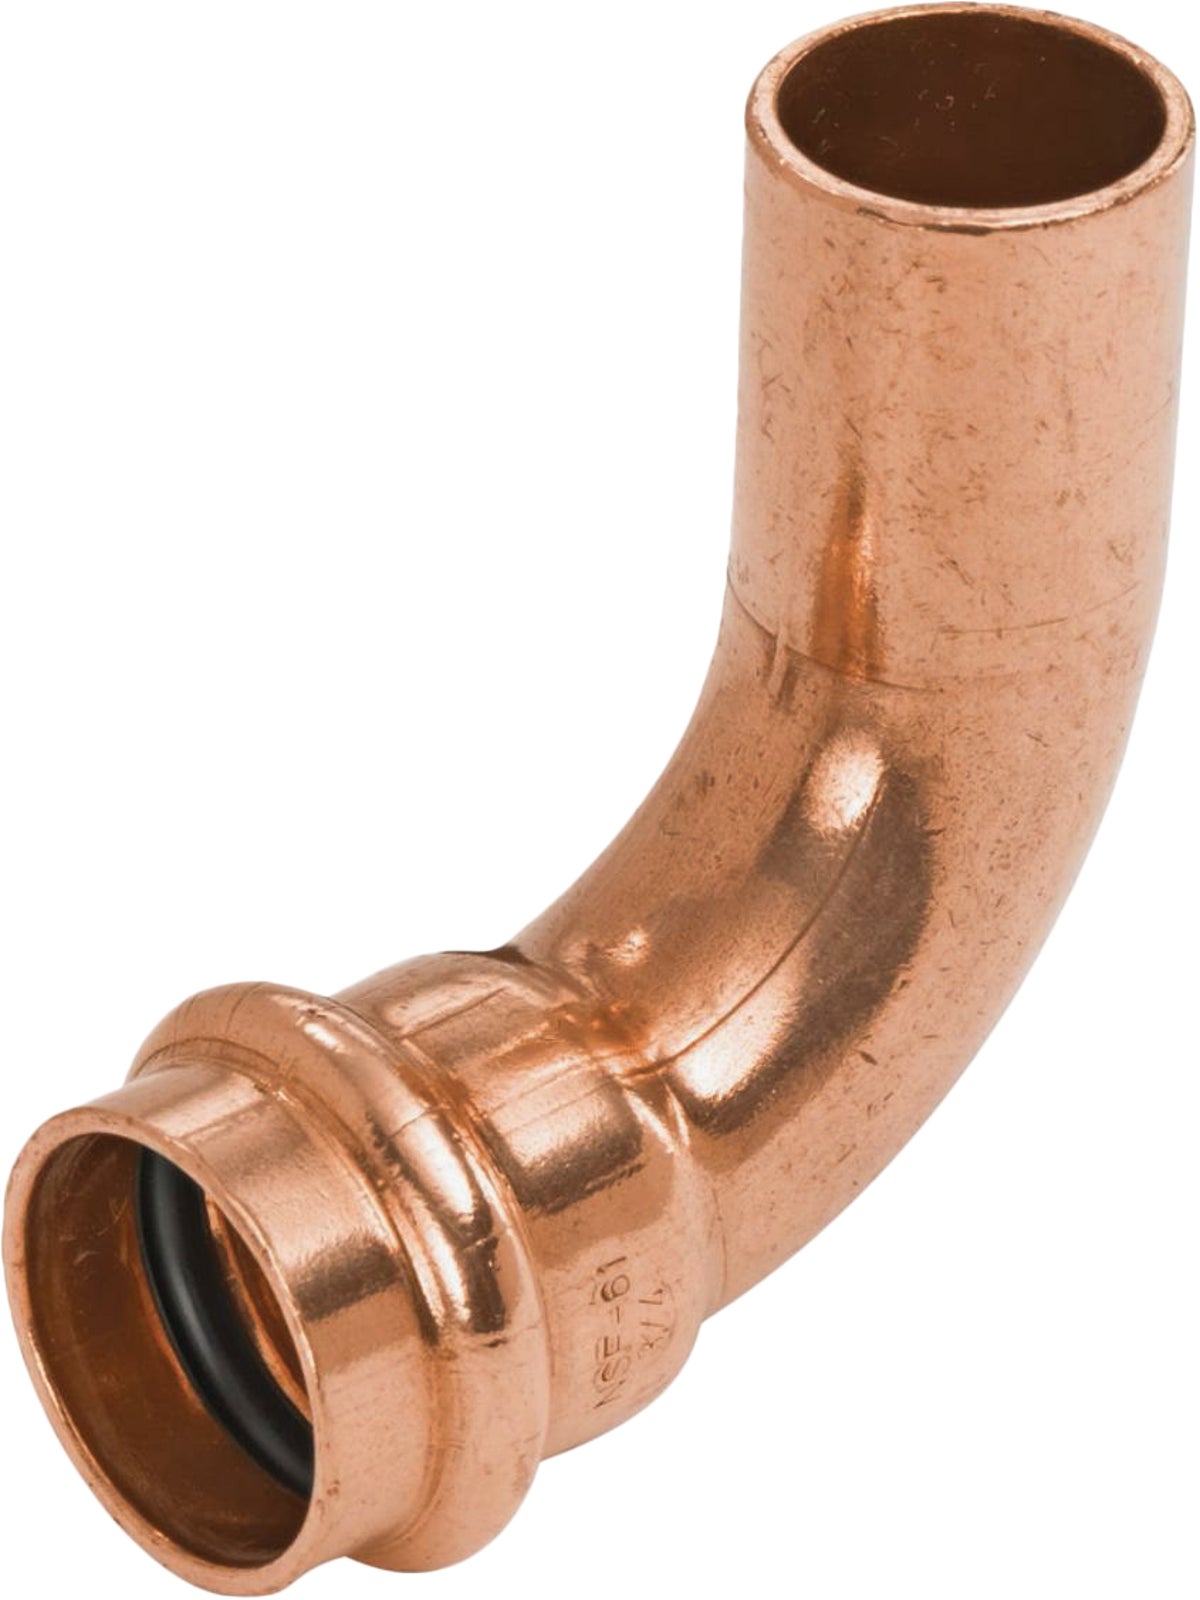 COPPER FITTING: COPPER 45 STREET ELBOW 3/4" Pack of 10 